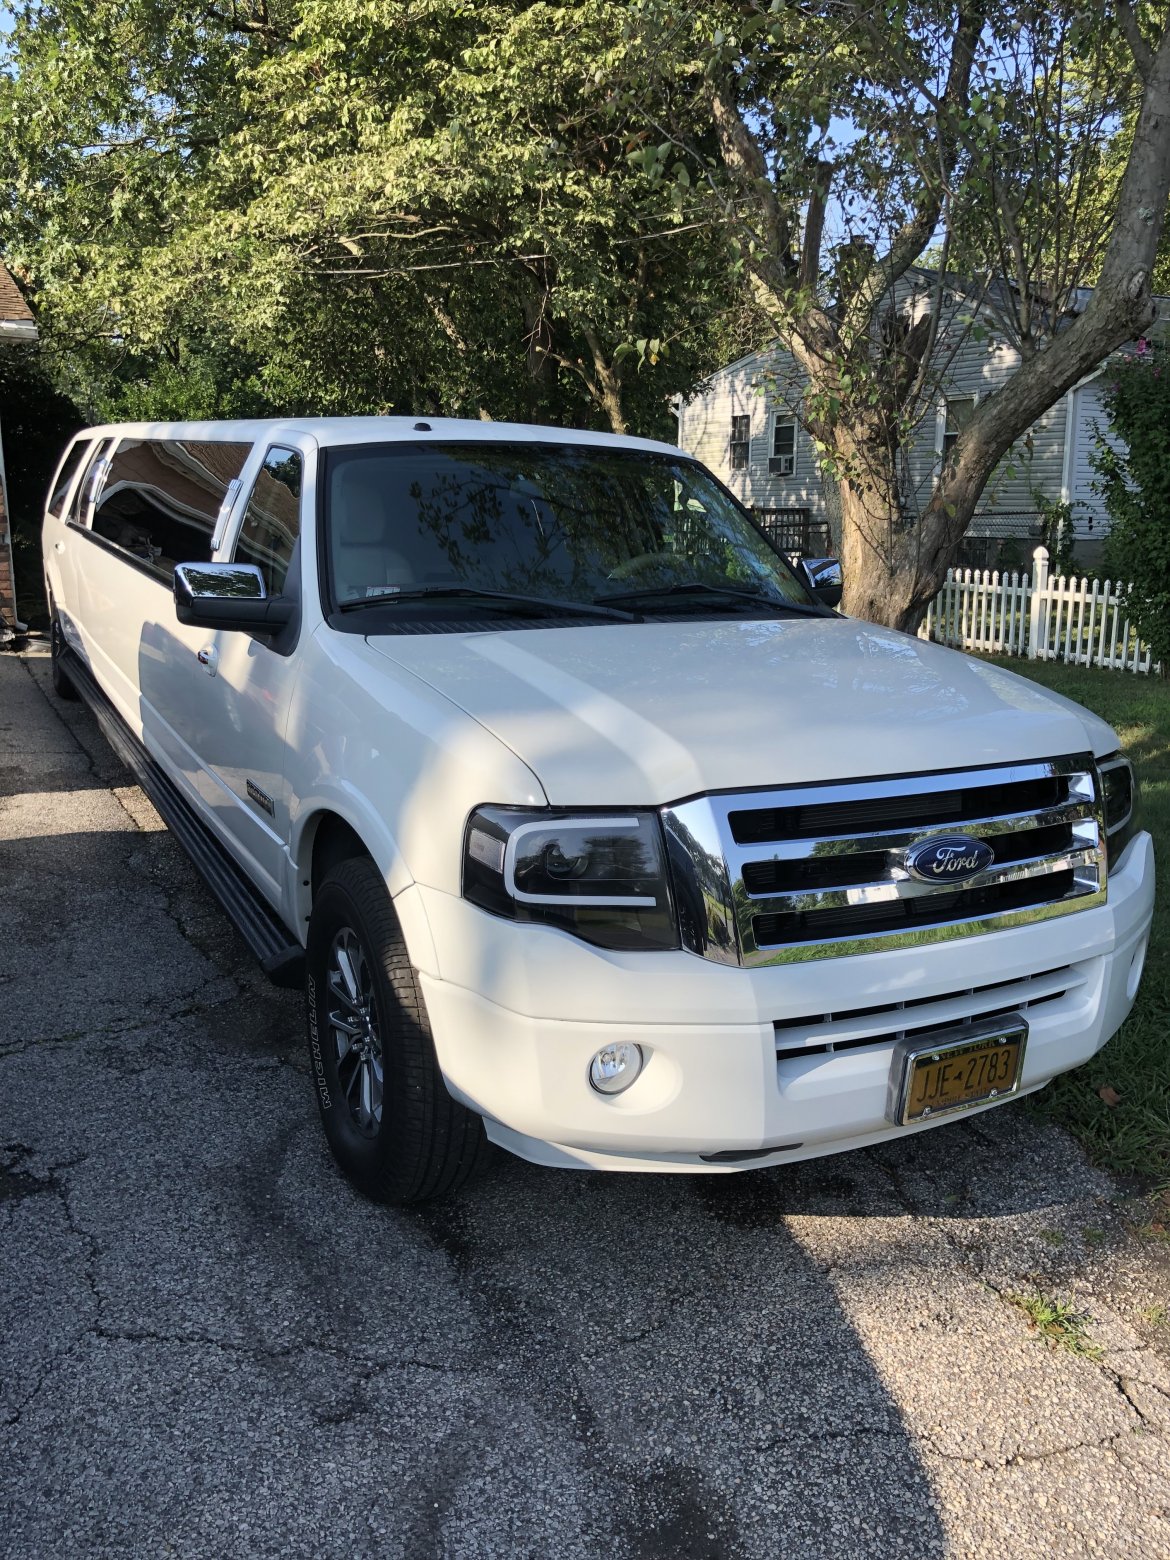 SUV Stretch for sale: 2008 Ford Expedition